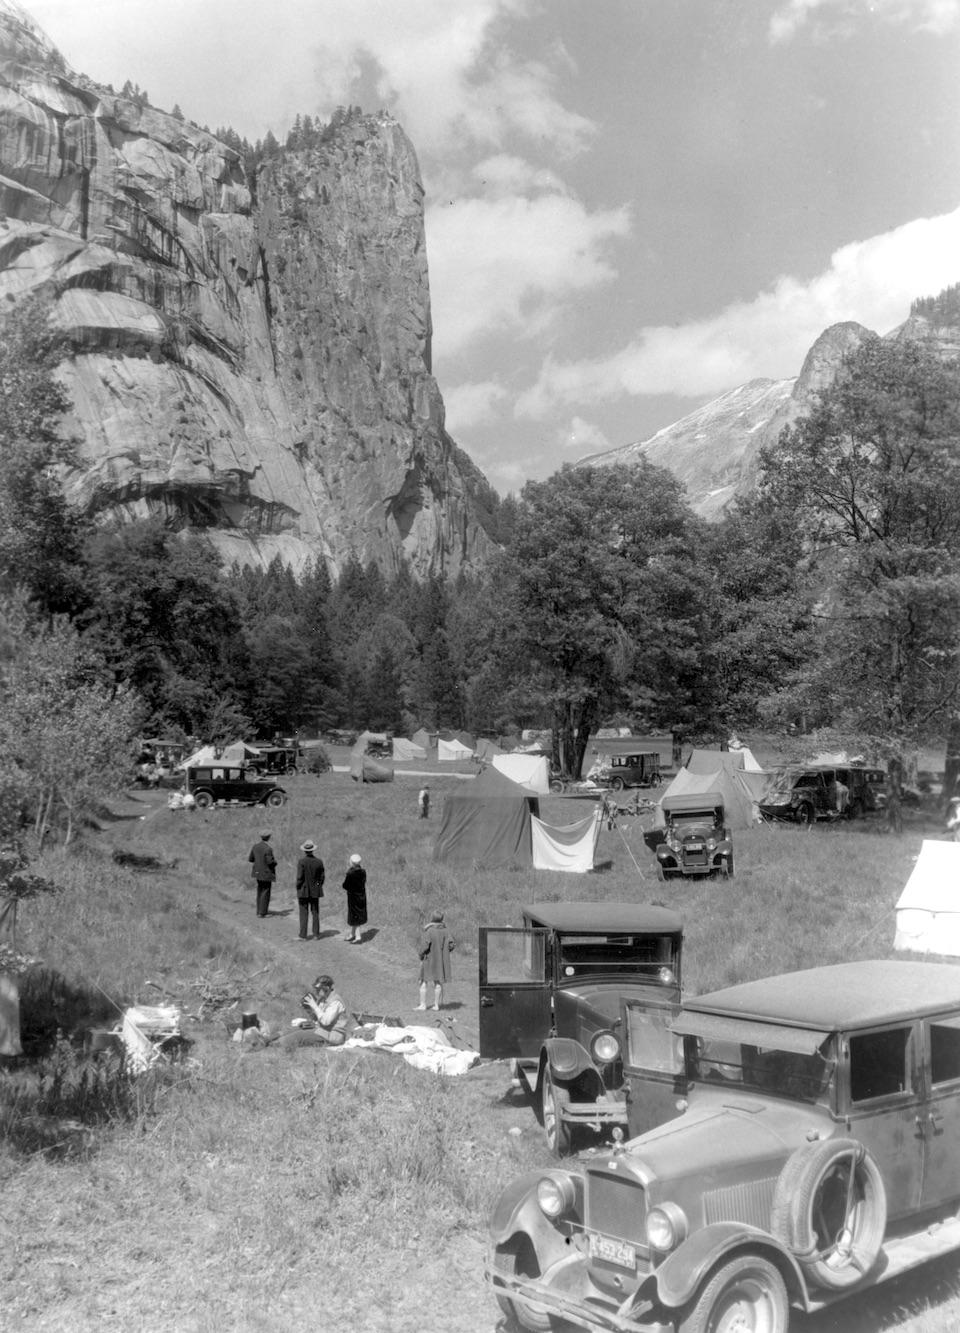 Visitors returned in force to national parks after the 1918 flu pandemic, and they exacted environmental damage on some, such as Stoneman Meadow at Yosemite National Park by camping on it/NPS